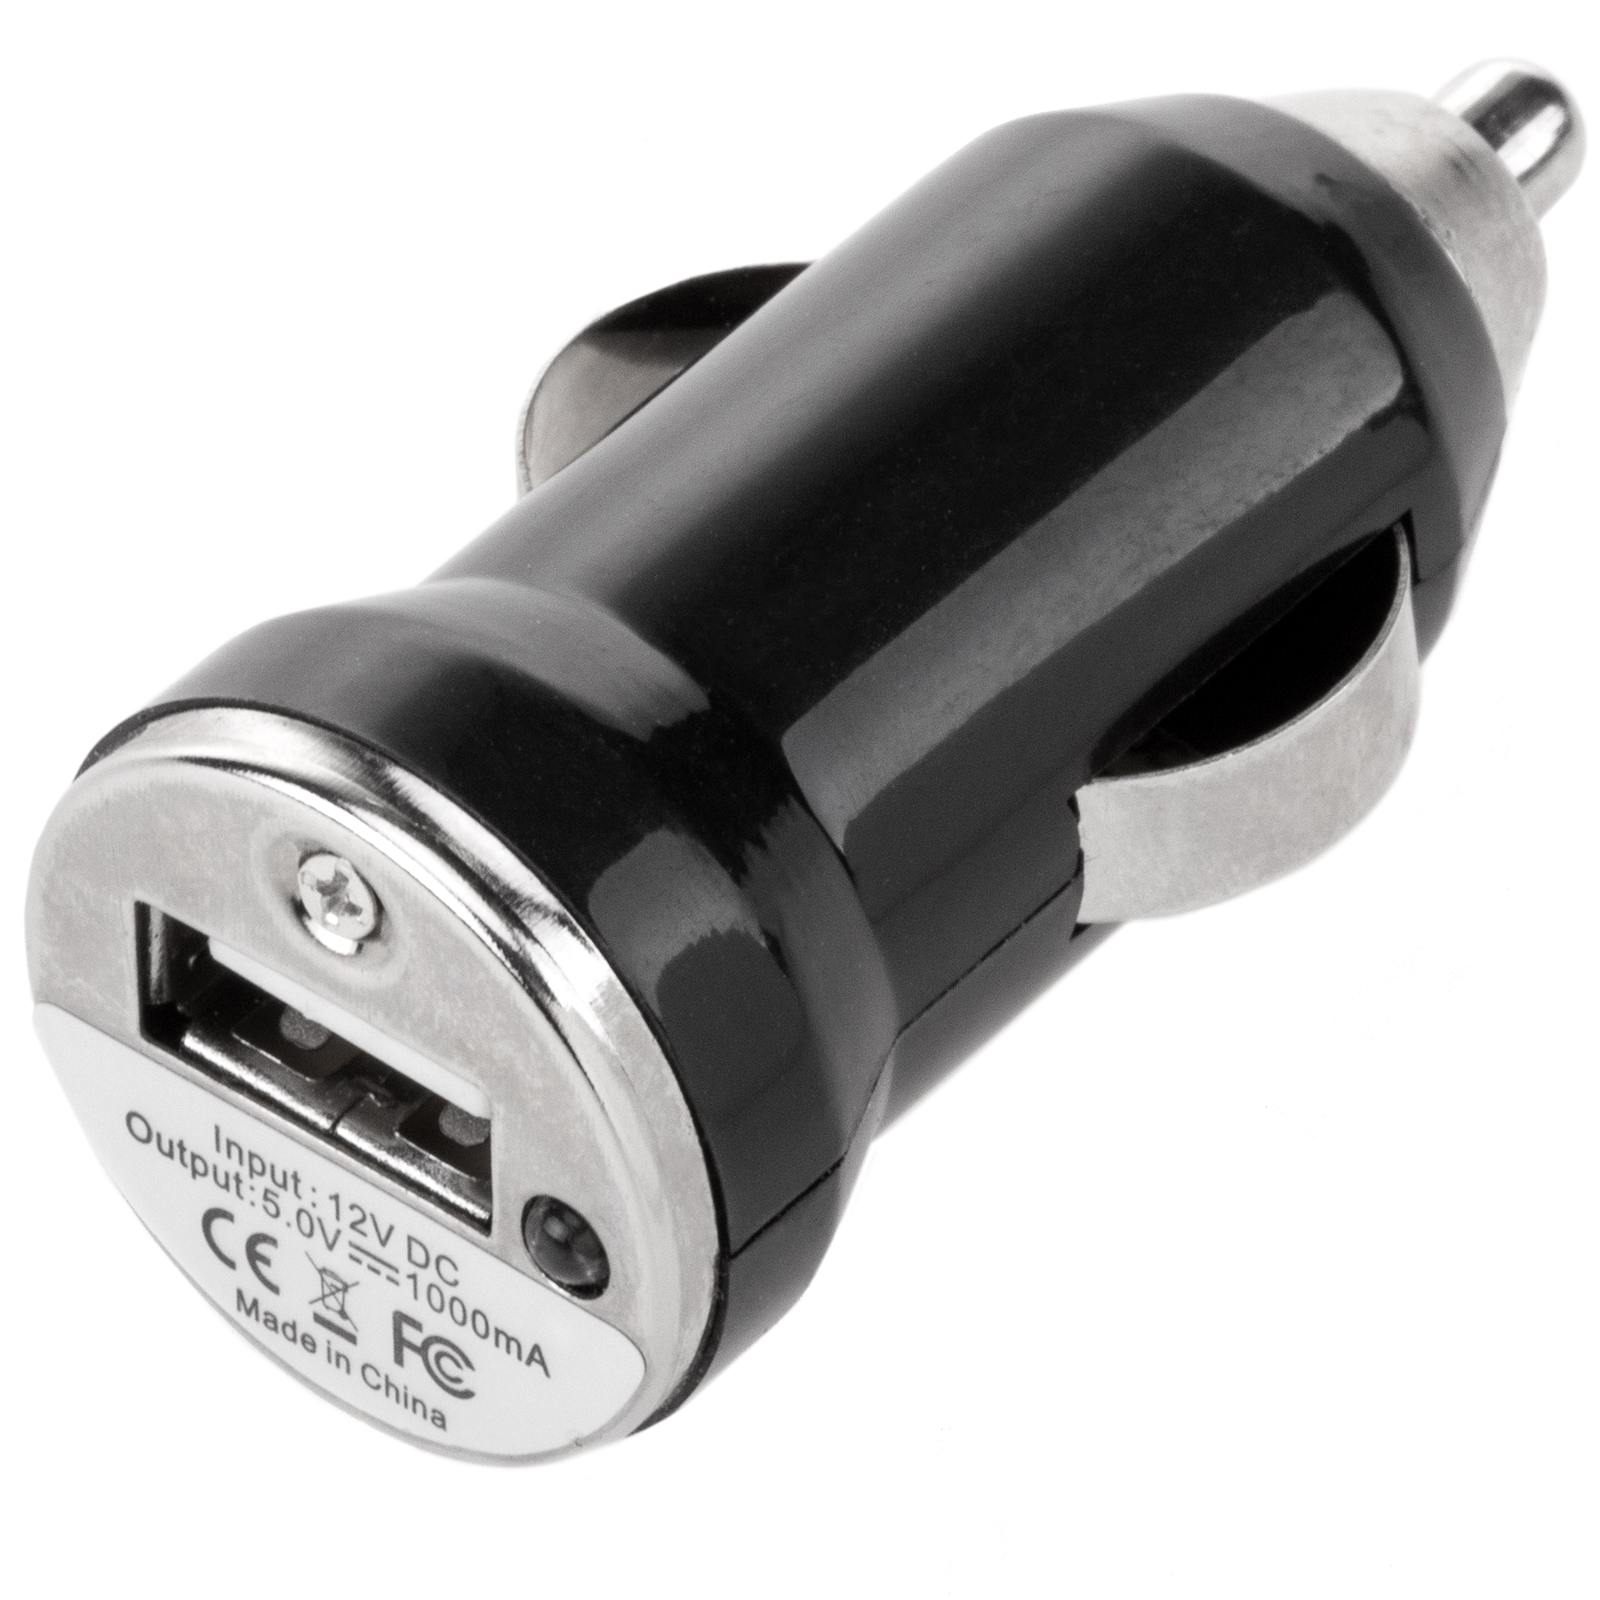 Car cigarette lighter charger. 12/24 VDC power supply with USB type A 1A  port Cablematic